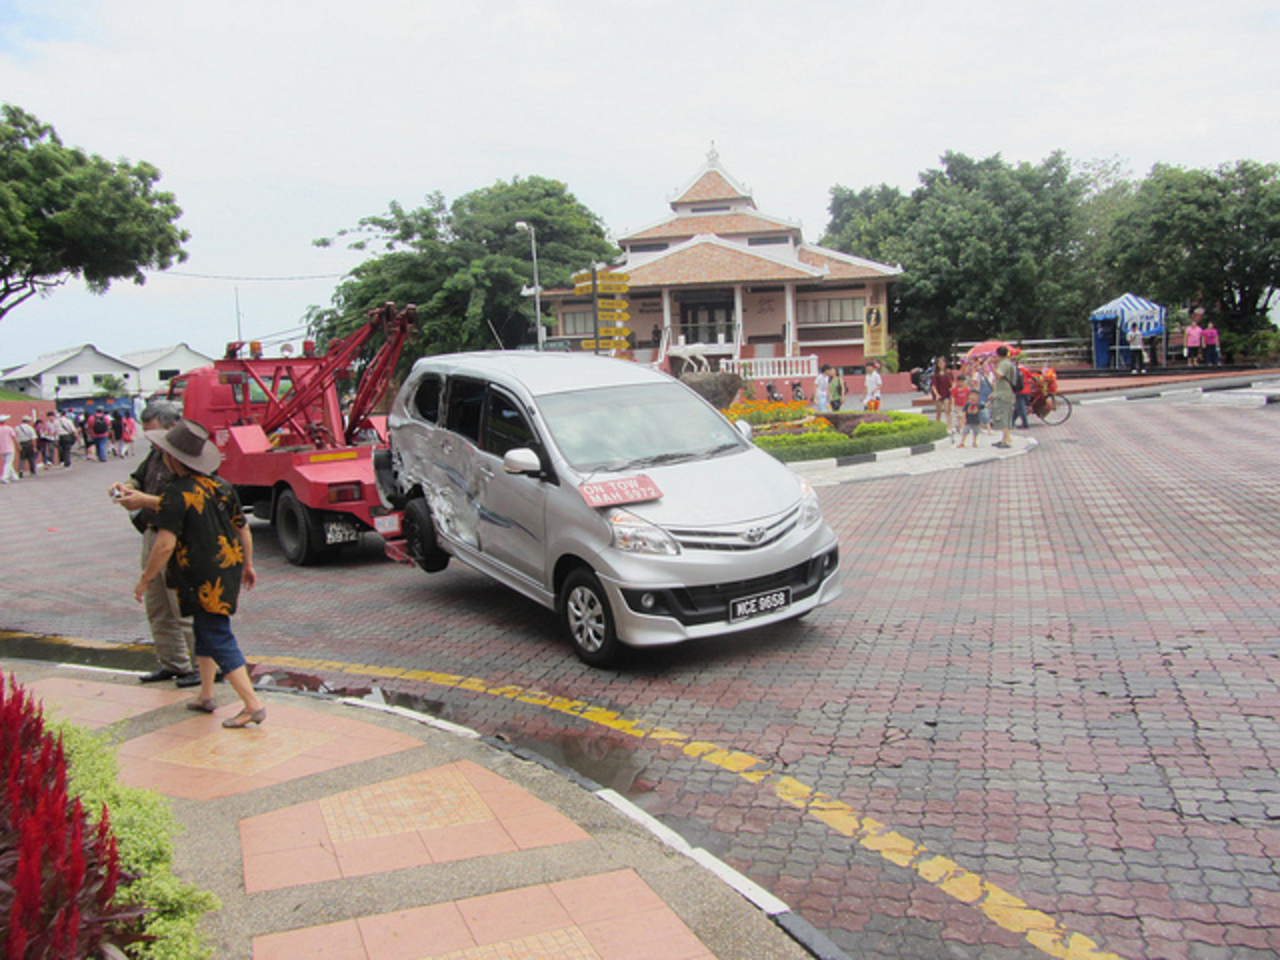 2012 Toyota Avanza On Tow In Malacca | Flickr - Photo Sharing!